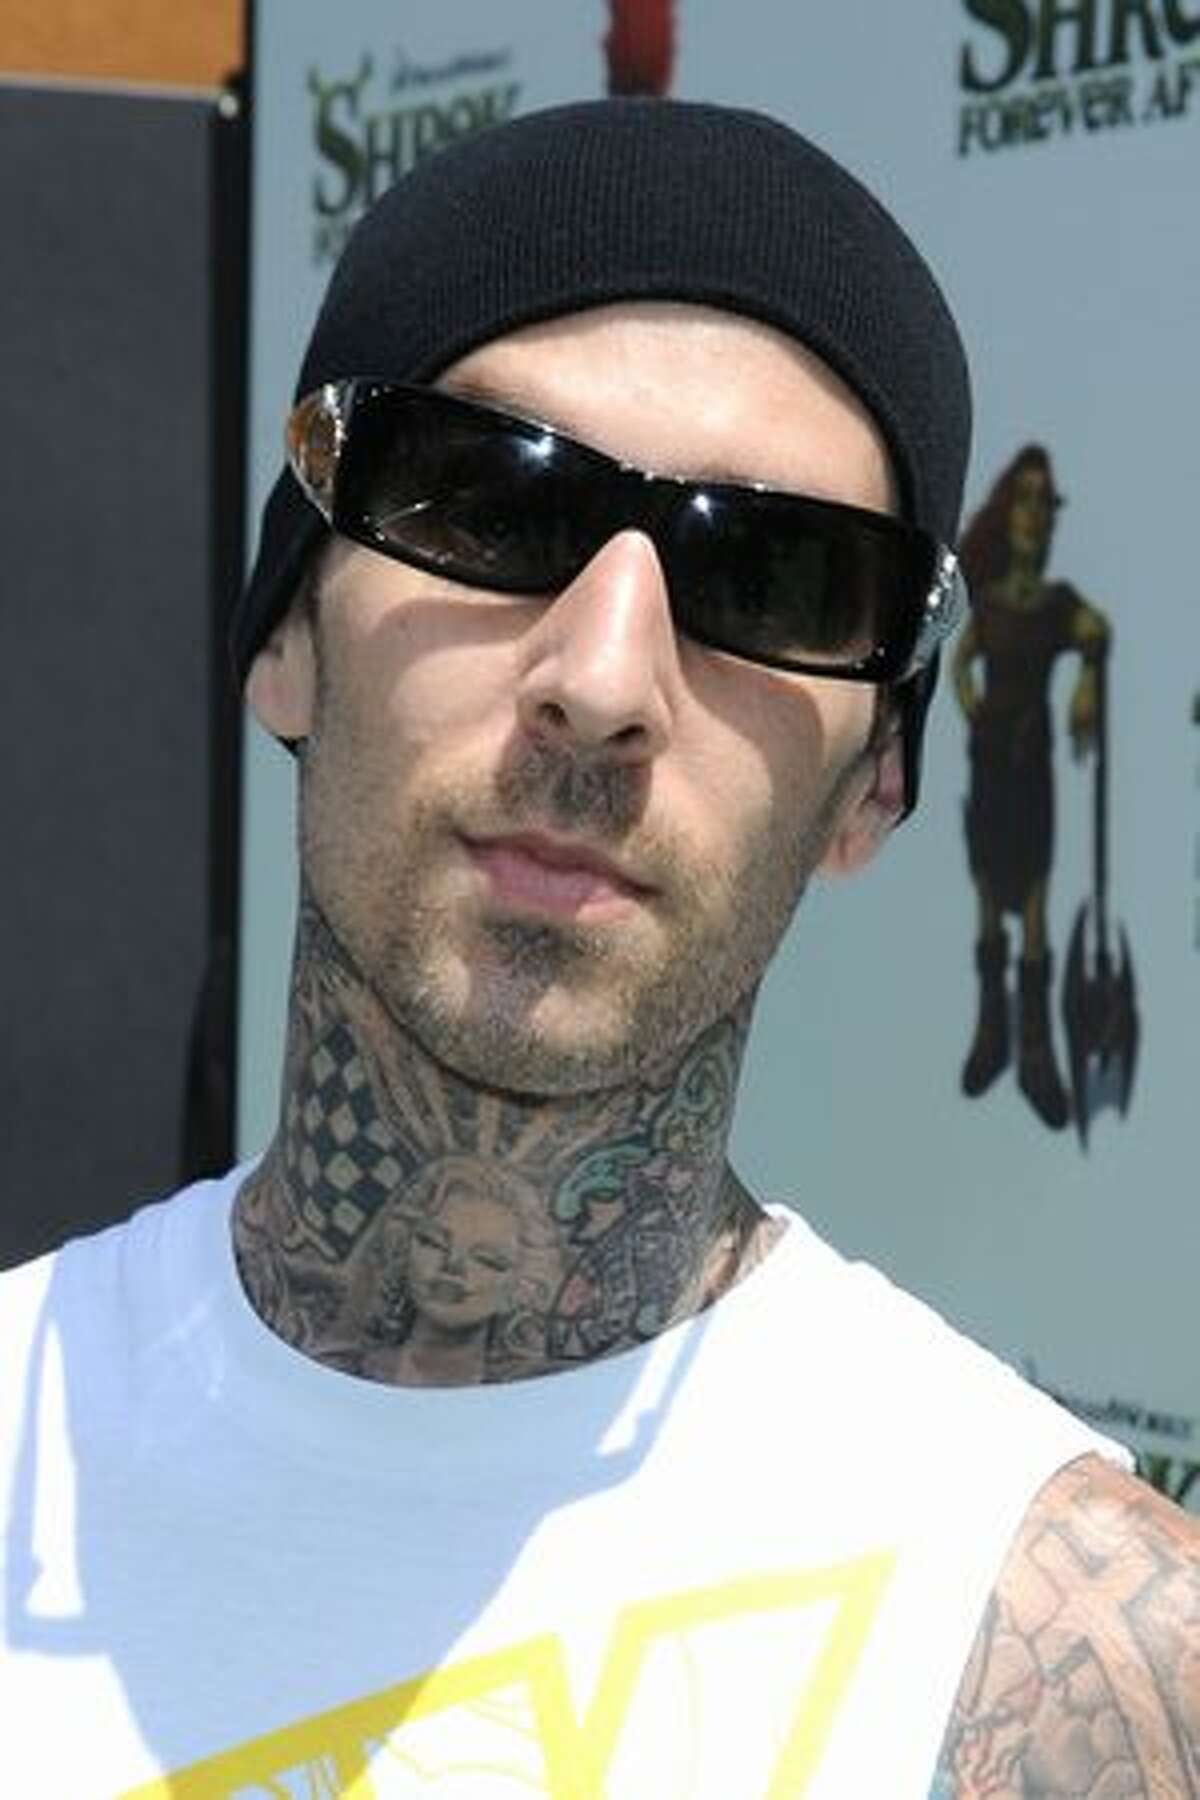 Musician Travis Barker arrives at the premiere of DreamWorks Animation's "Shrek Forever After" at Gibson Amphitheatre.